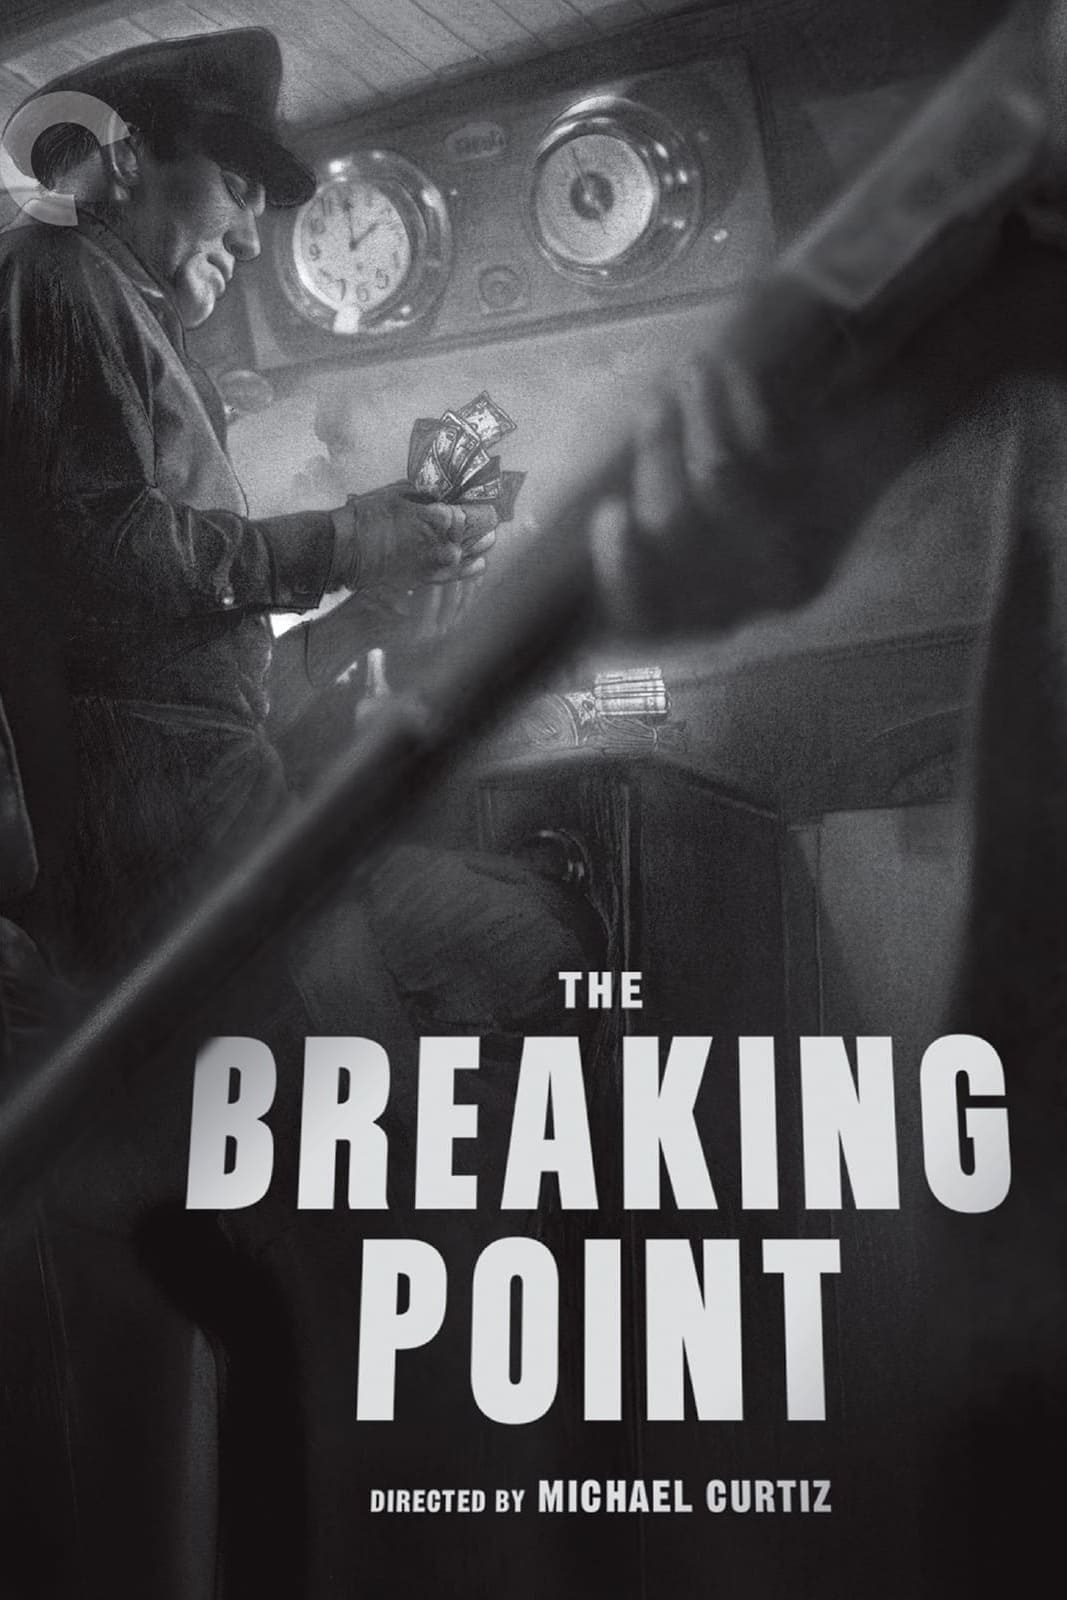 Fluid Style: Michael Curtiz and The Breaking Point